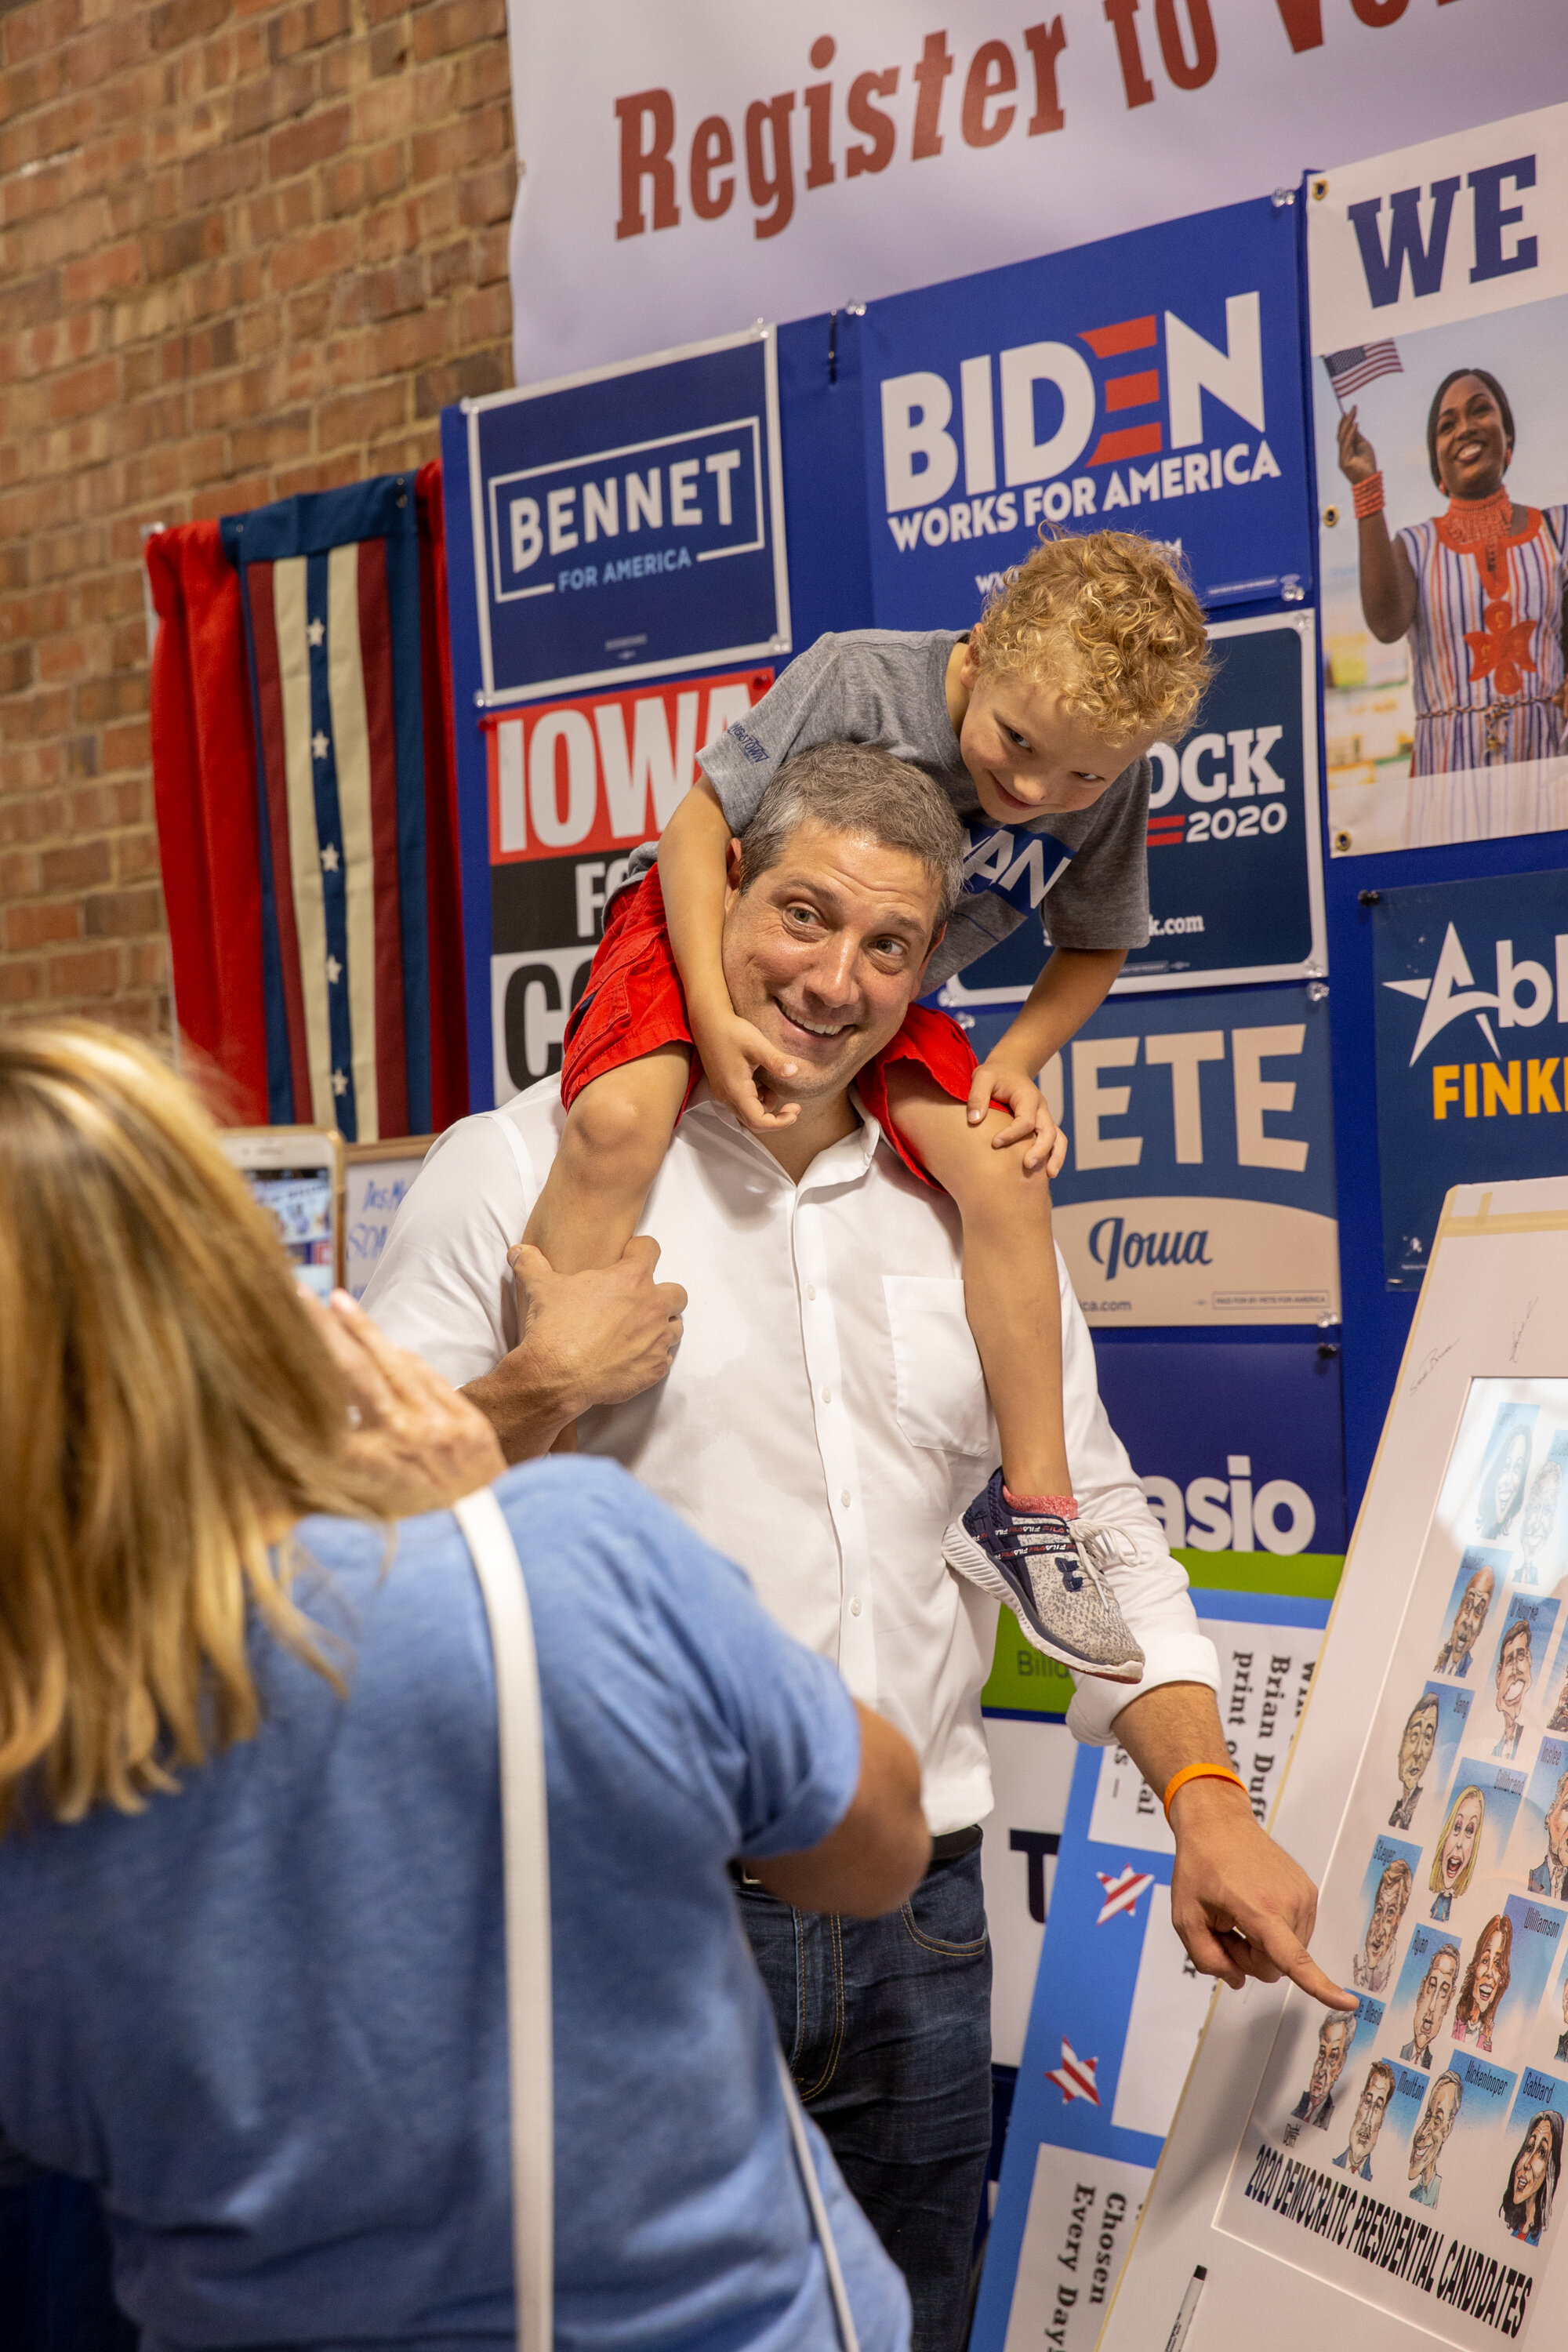  Rep. Tim Ryan poses for a photo at the Iowa State Fair on August 10, 2019 in Des Moines, Iowa. (For Buzzfeed News) 